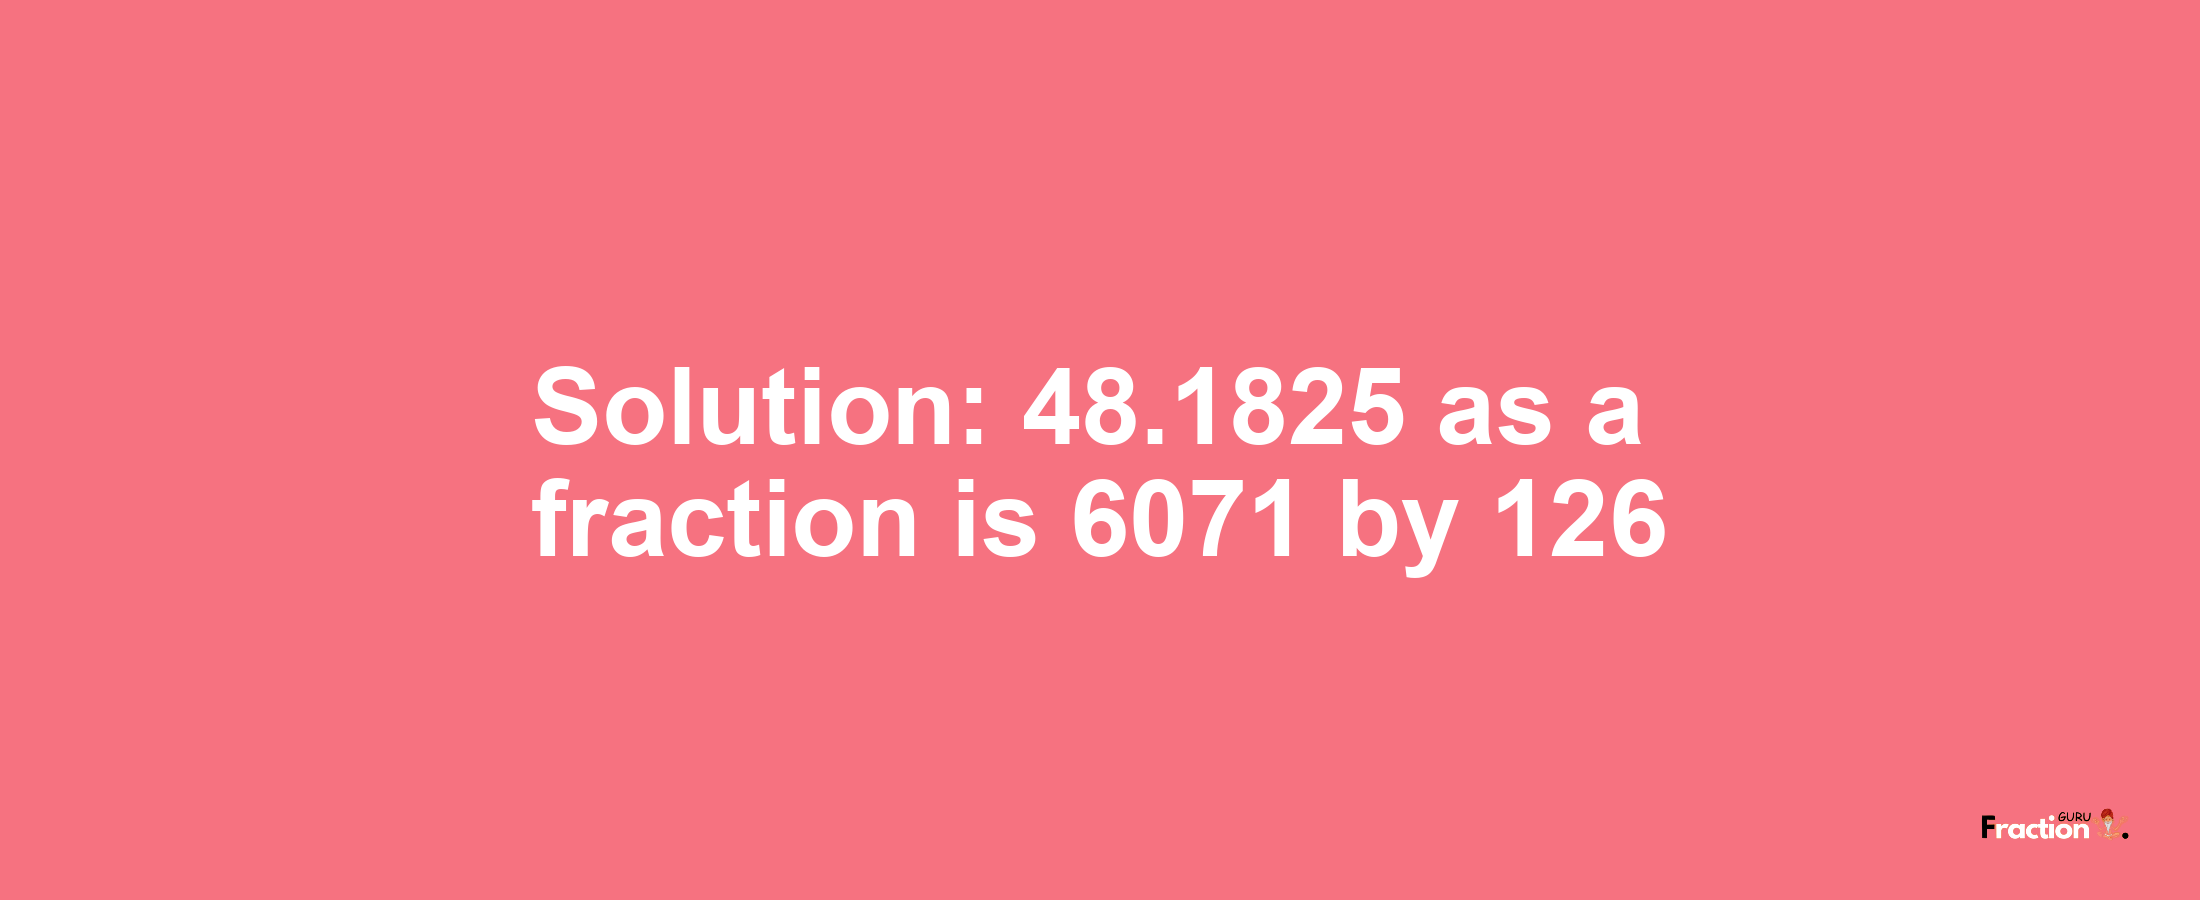 Solution:48.1825 as a fraction is 6071/126